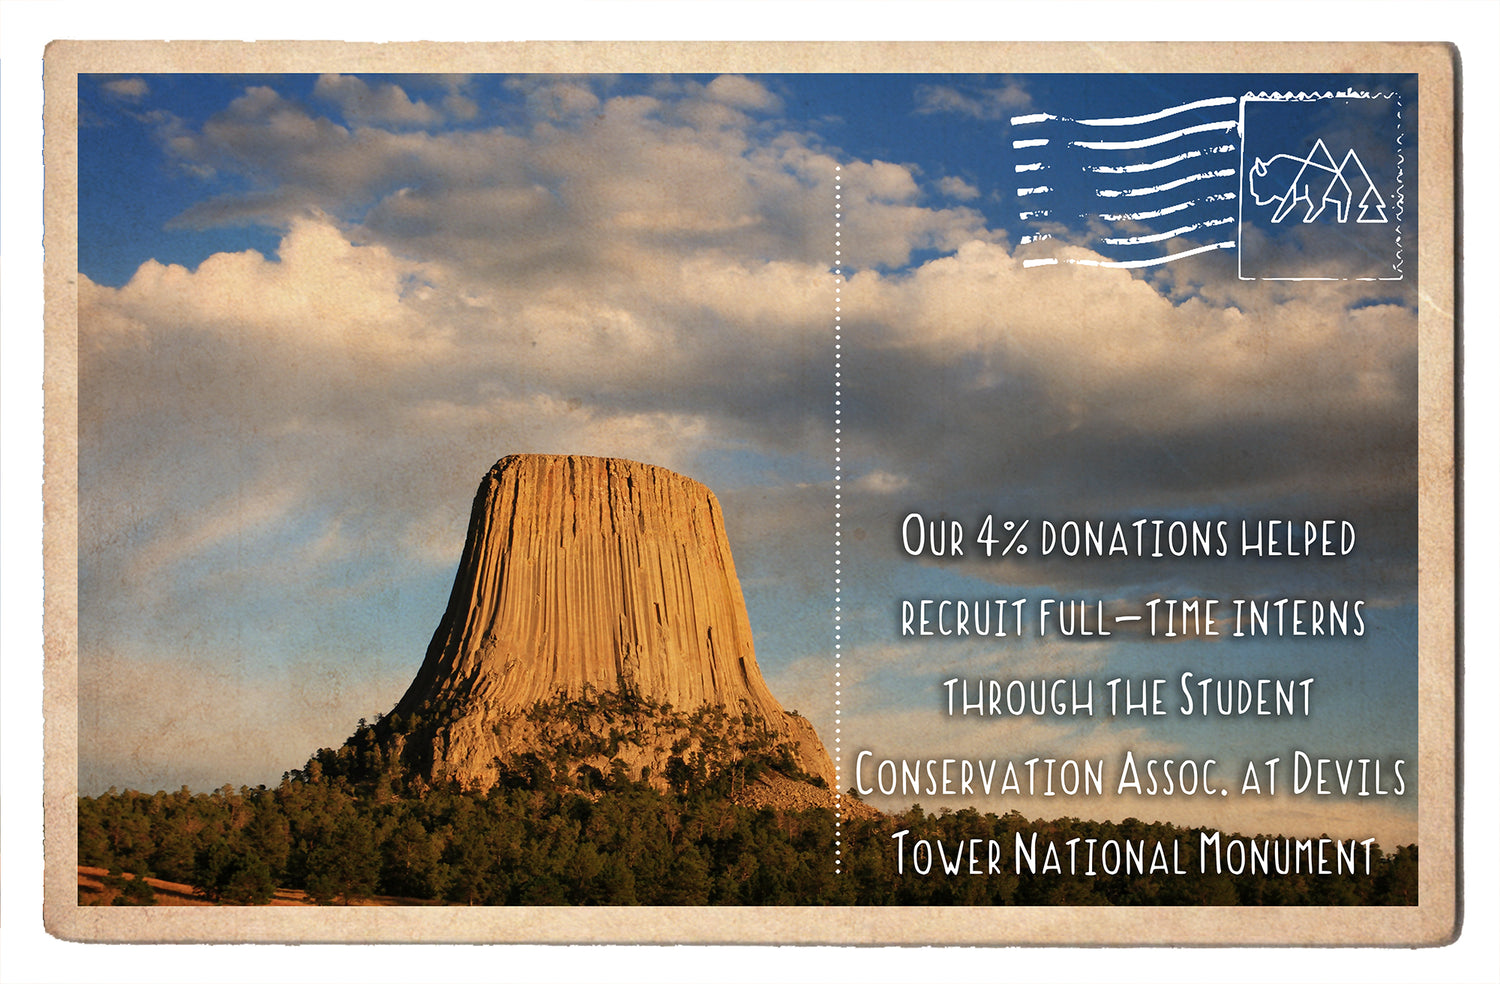 Full-time Interns at Devils Tower National Monument